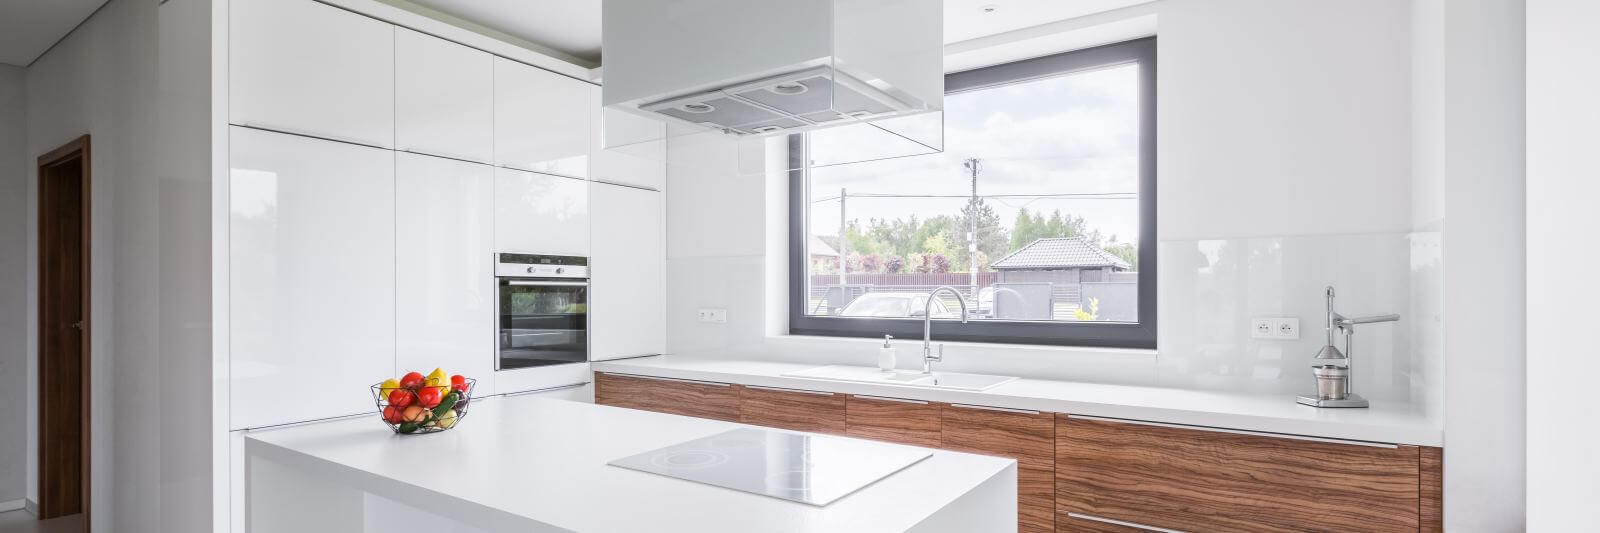 Panoramic view of modern, white kitchen with island and long countertop